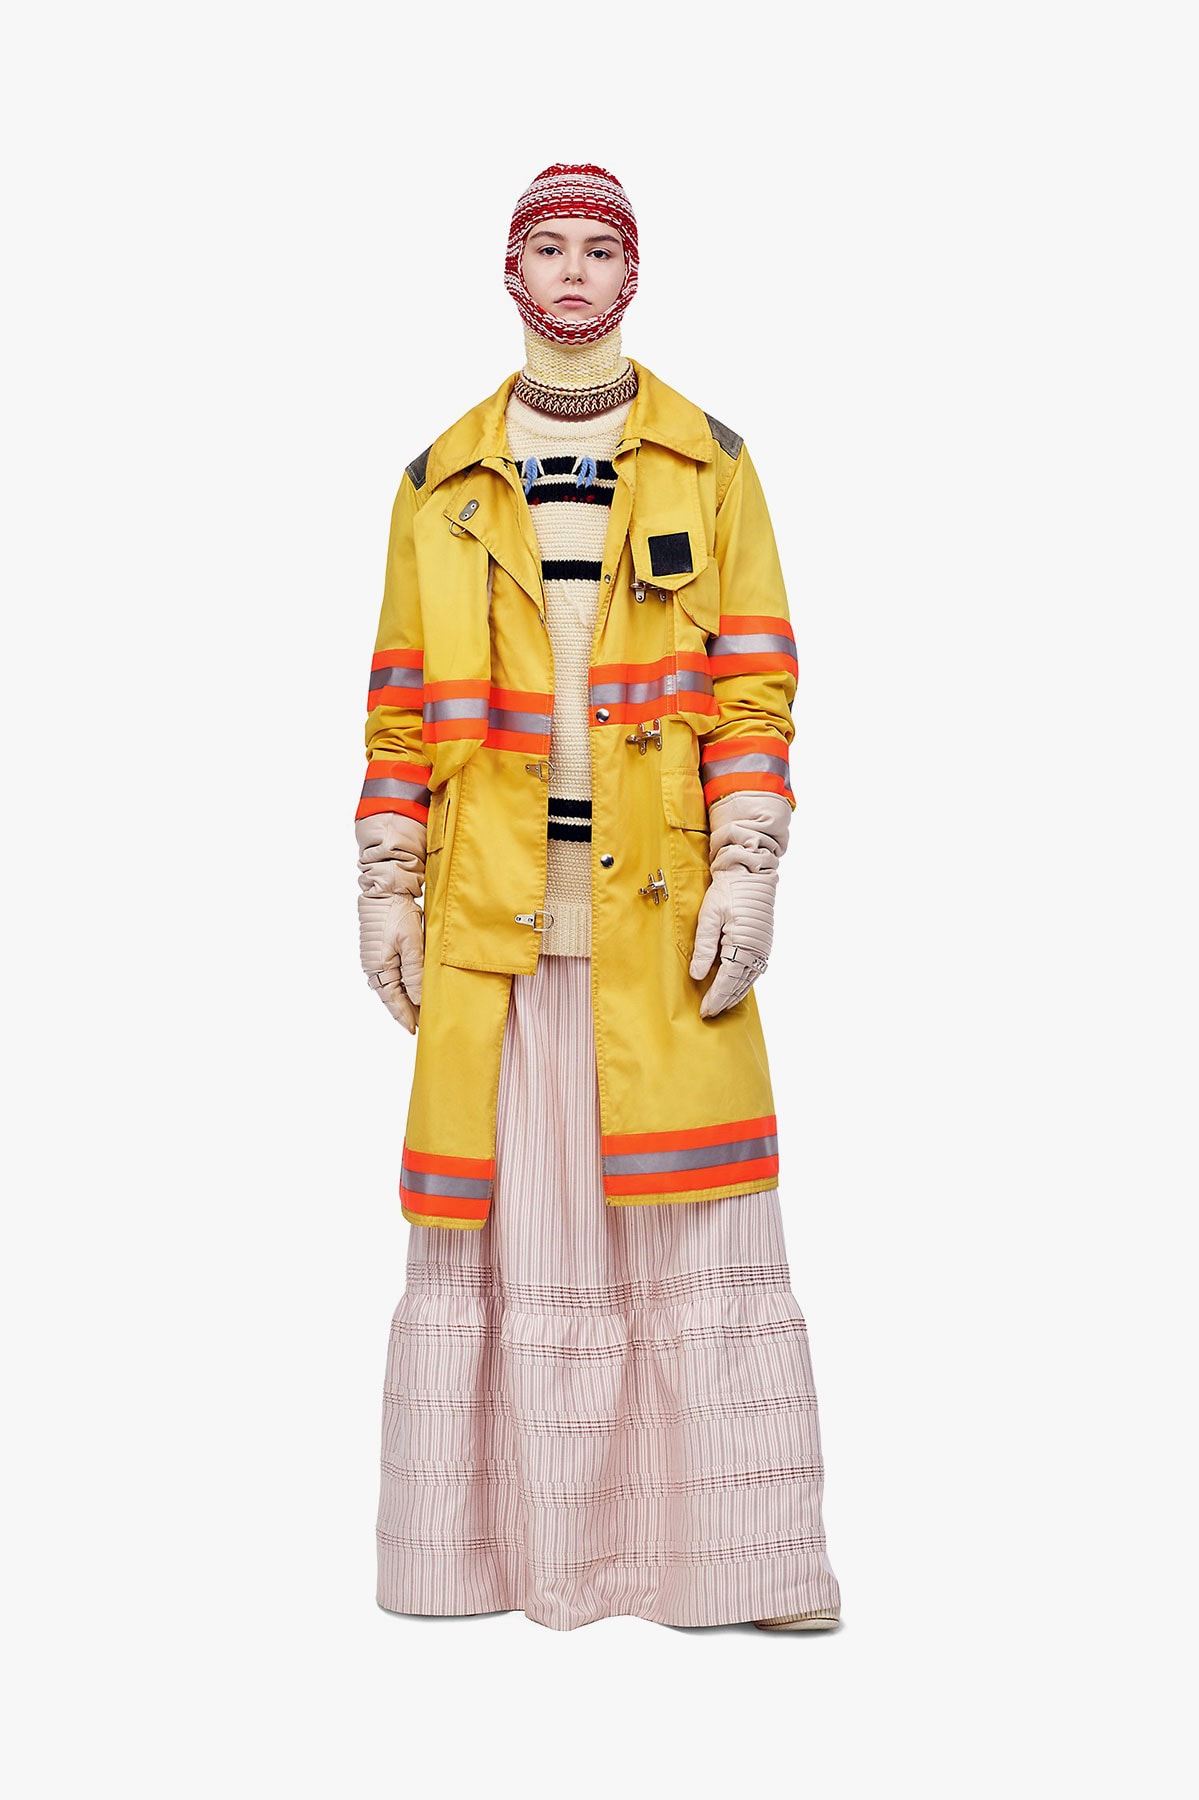 calvin klein 205w39nyc fireman man fighter distressed jacket coat jumpsuit orange yellow red outerwear ankle boot black white leather fall winter 2018 drop release date pre order buy sale shop sell